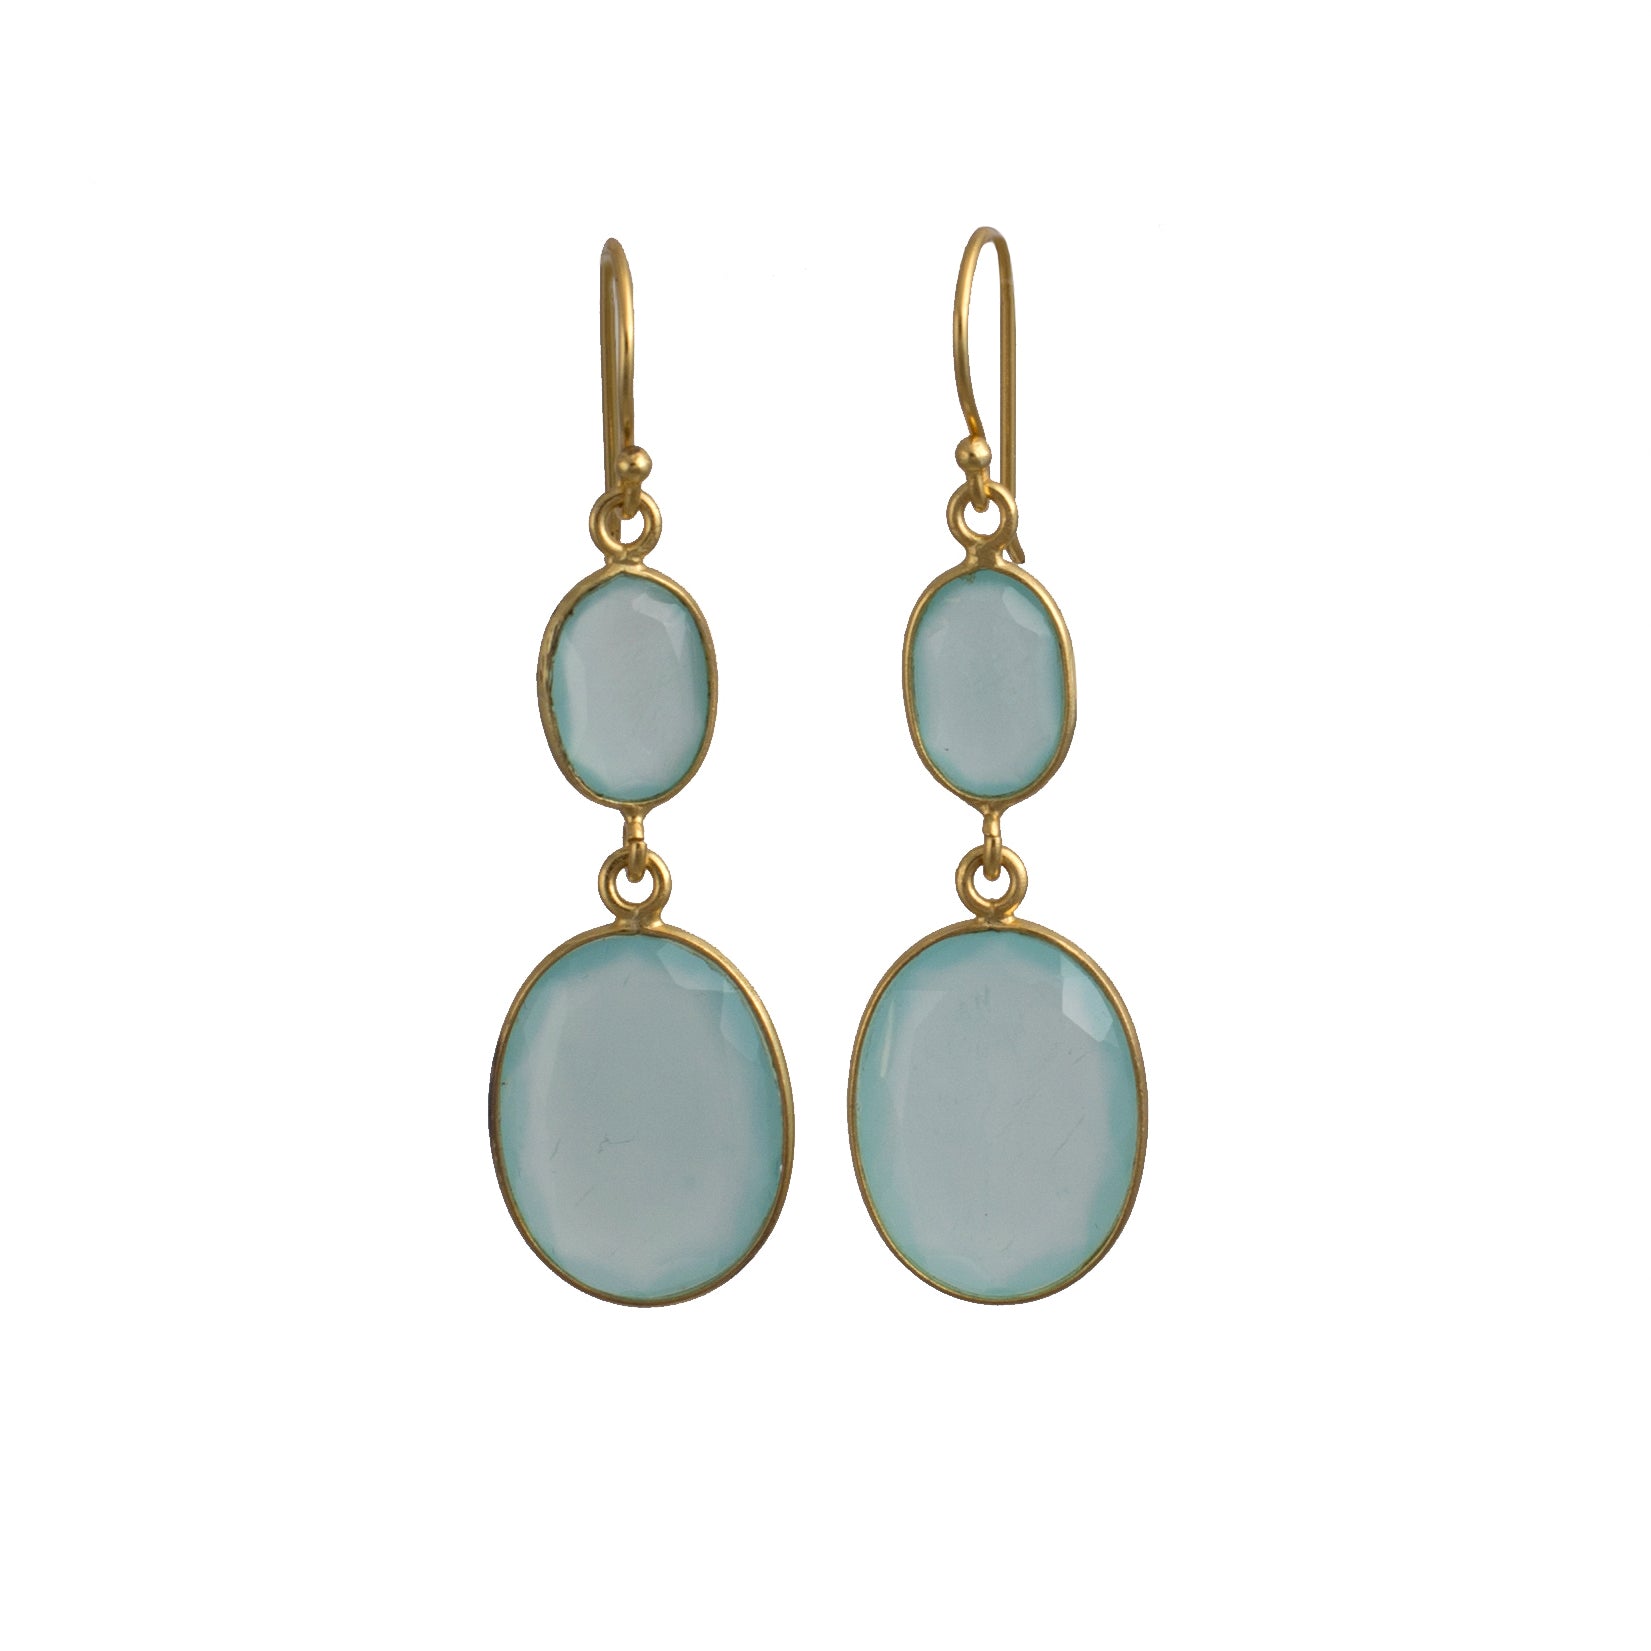 Gold Plated Sterling Silver Natural Gemstone Long Earrings - Aqua Chalcedony